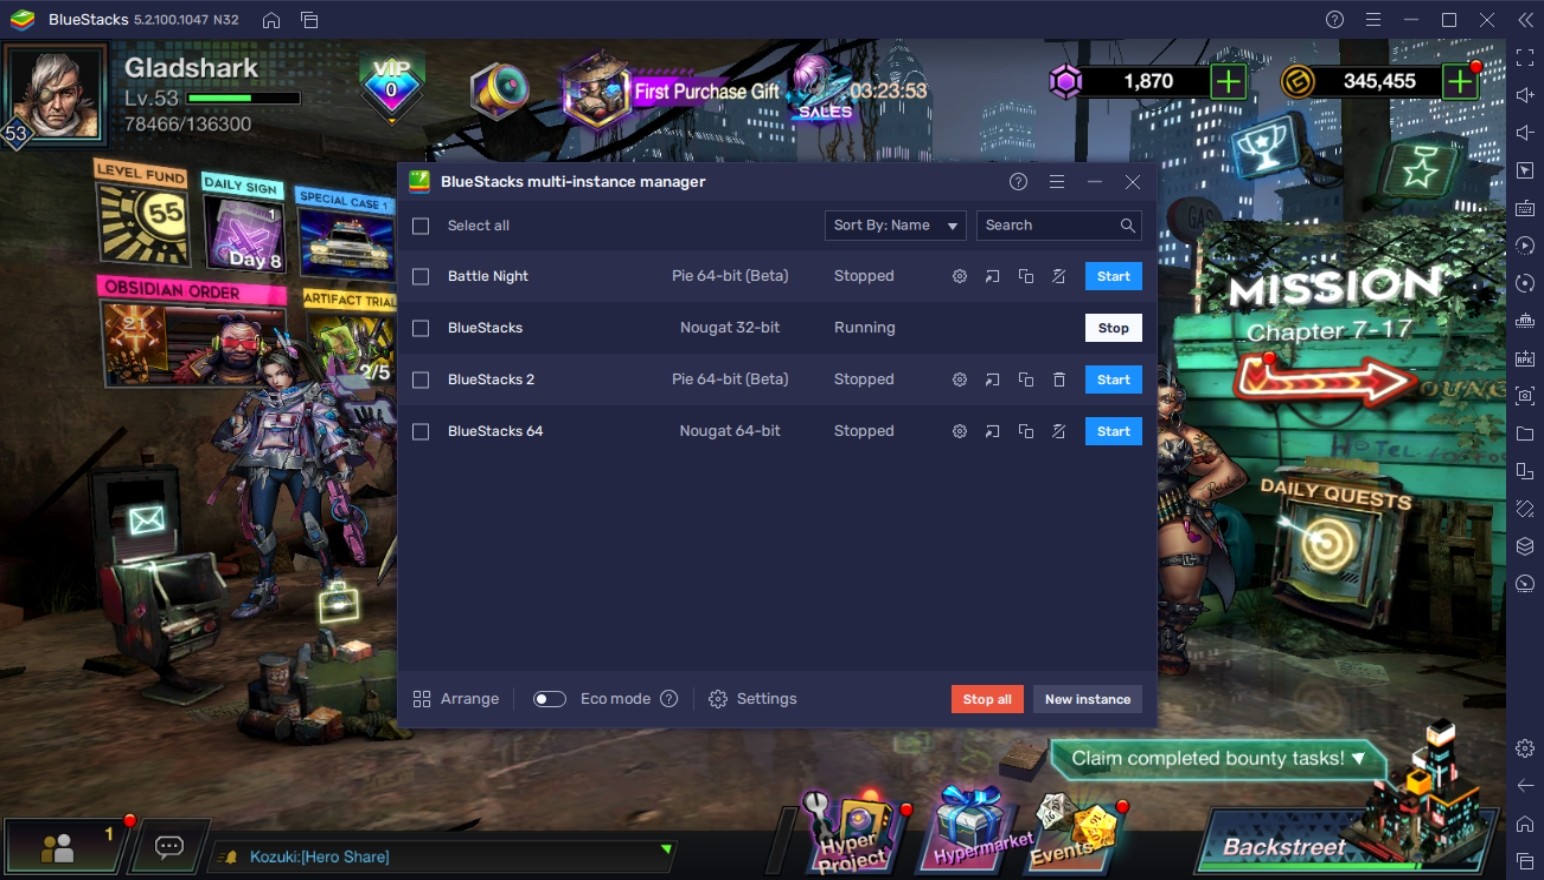 How To Play Battle Night: Cyberpunk-Idle RPG on PC with BlueStacks